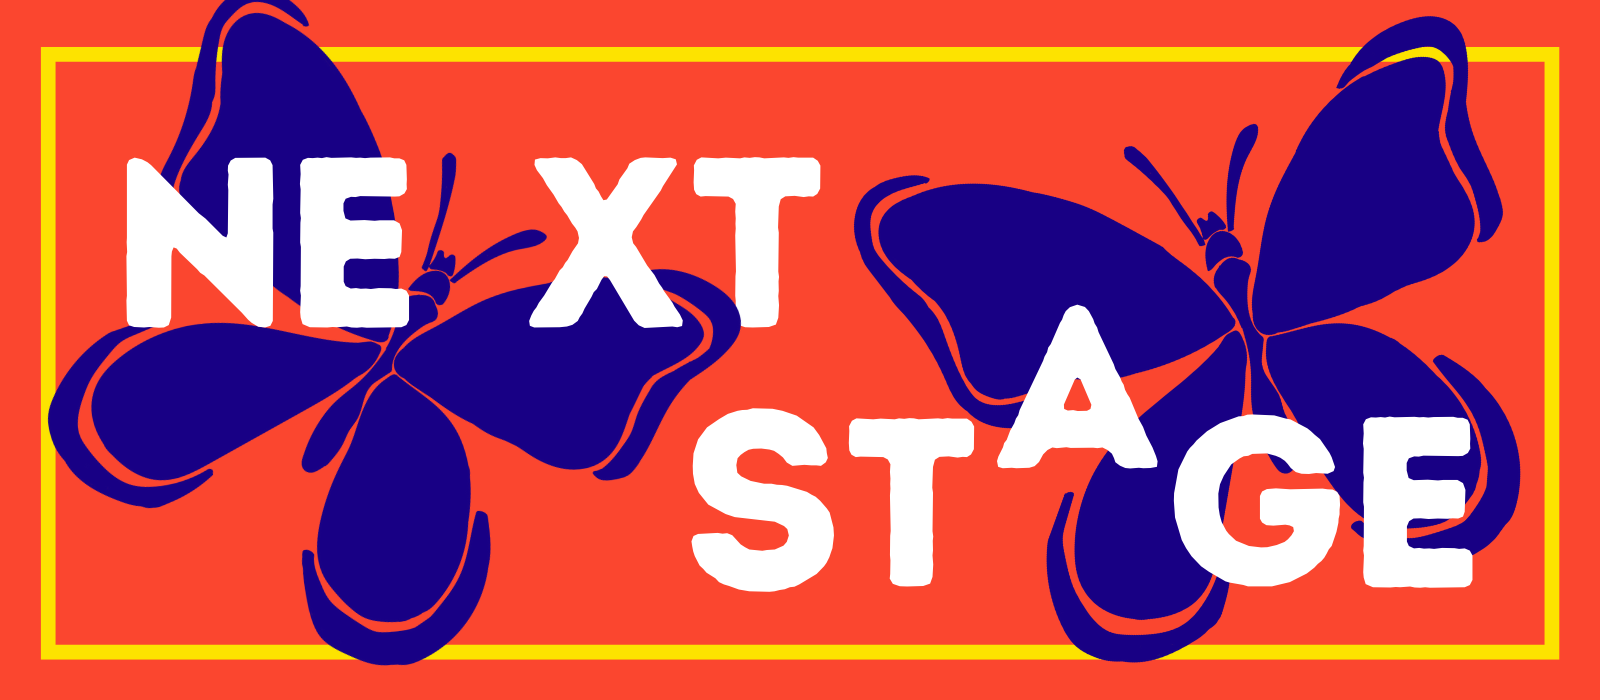 "Toronto Fringe presents Next Stage" on a orange background with blue butterflies 